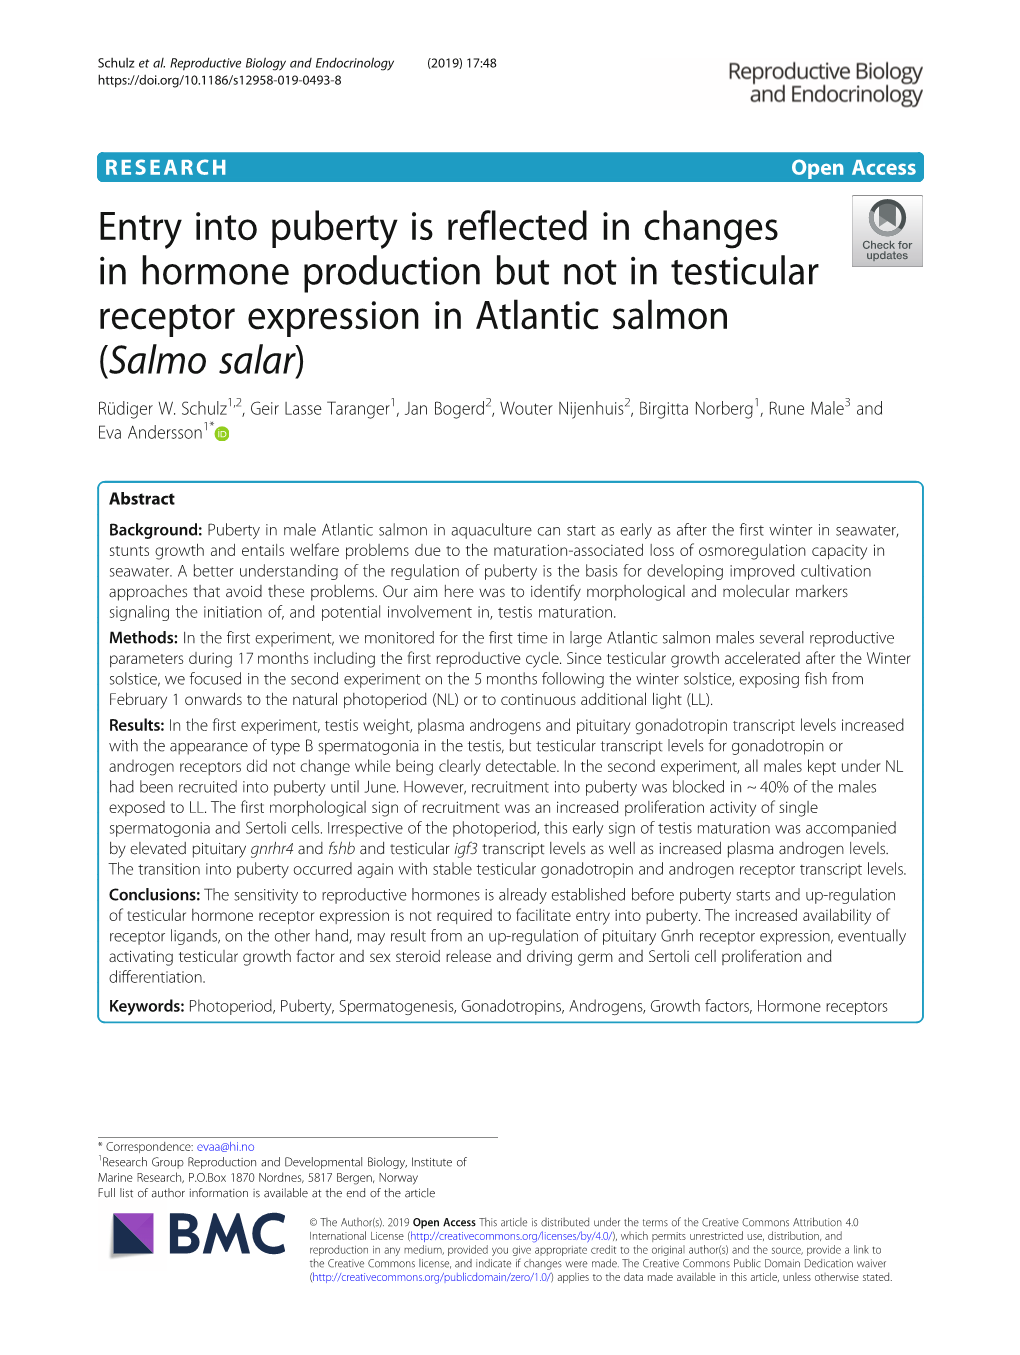 Entry Into Puberty Is Reflected in Changes in Hormone Production but Not in Testicular Receptor Expression in Atlantic Salmon (Salmo Salar) Rüdiger W